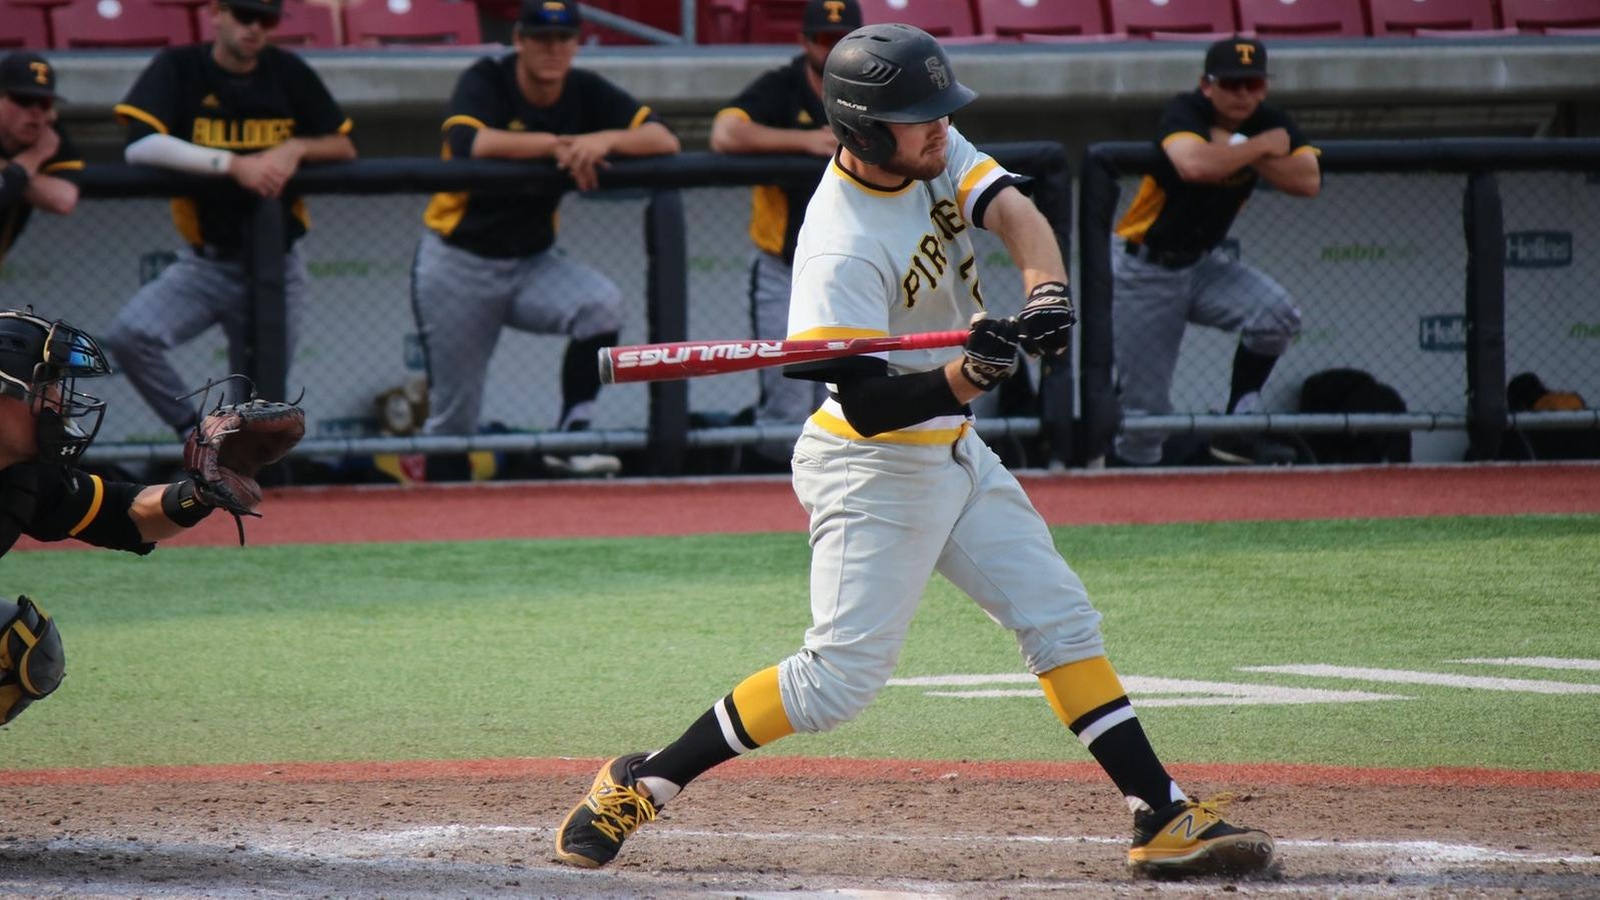 Pirates fall short against Trinity in elimination game, 4-3